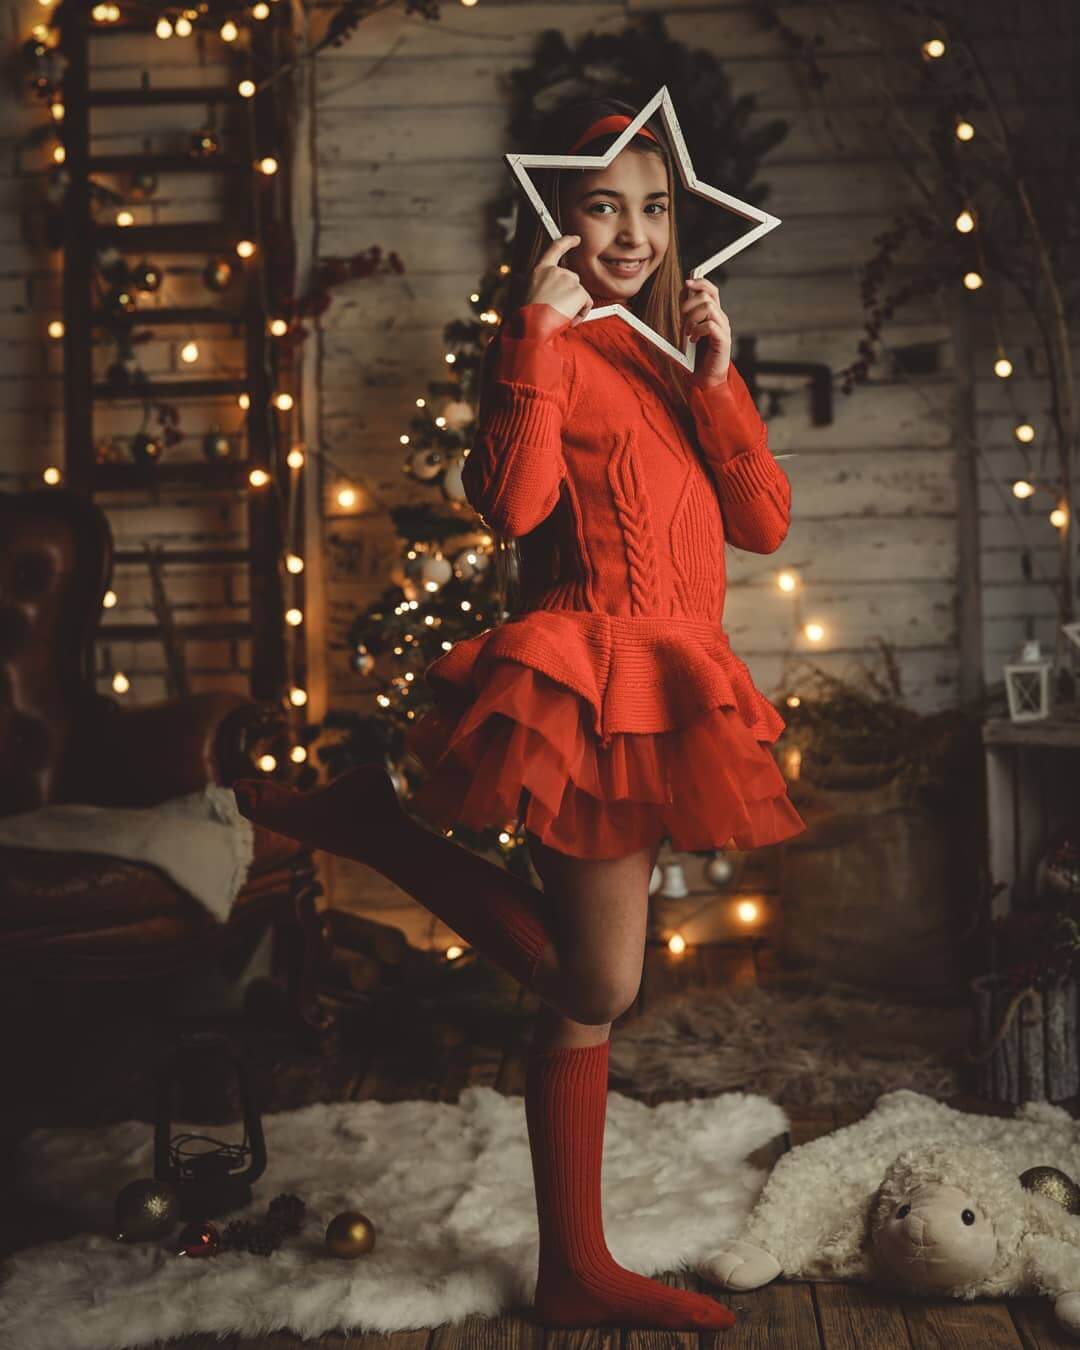 Christmas Photoshoot Ideas for Teenage Girl Pose With A Woolen Christmas Dress